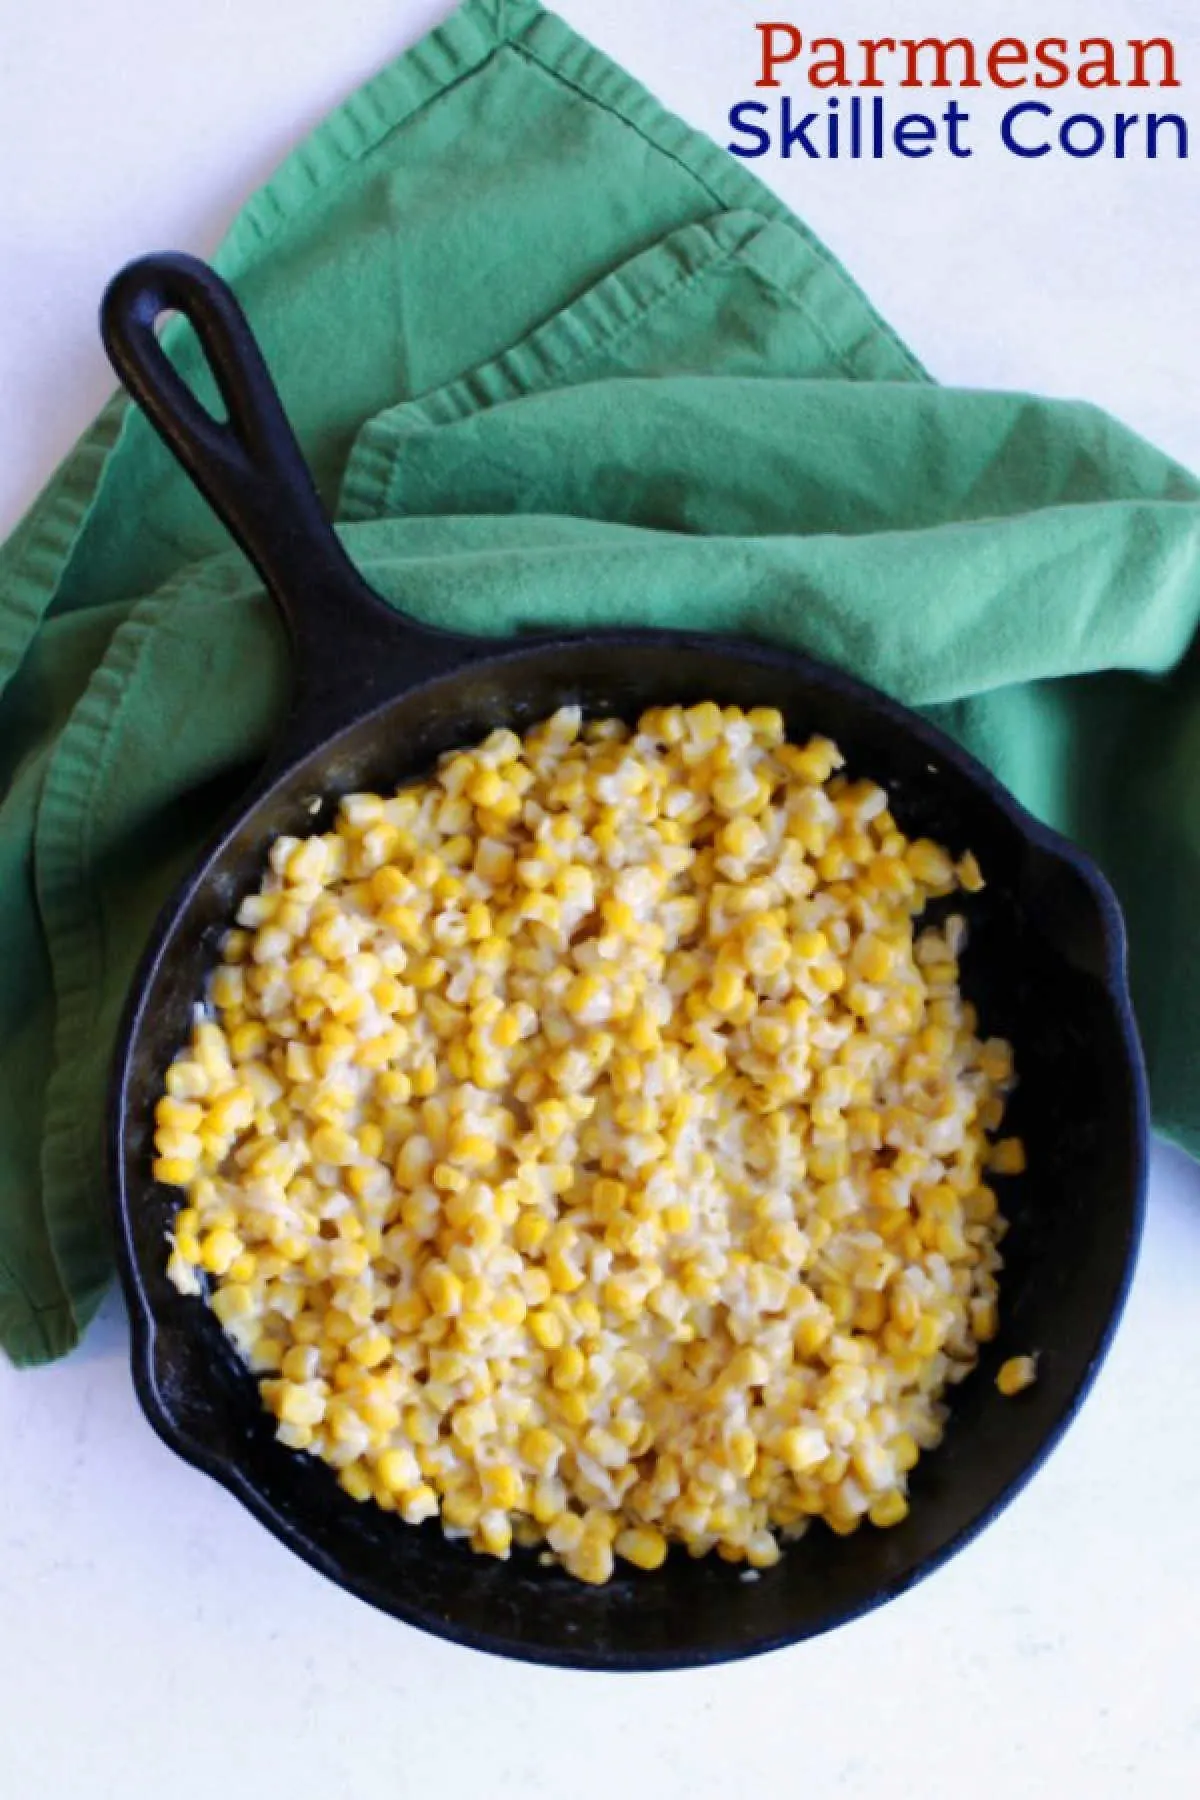 This creamy savory corn side dish is quick and easy to make and it goes with just about anything. Make it a regular addition to your dinner menu.